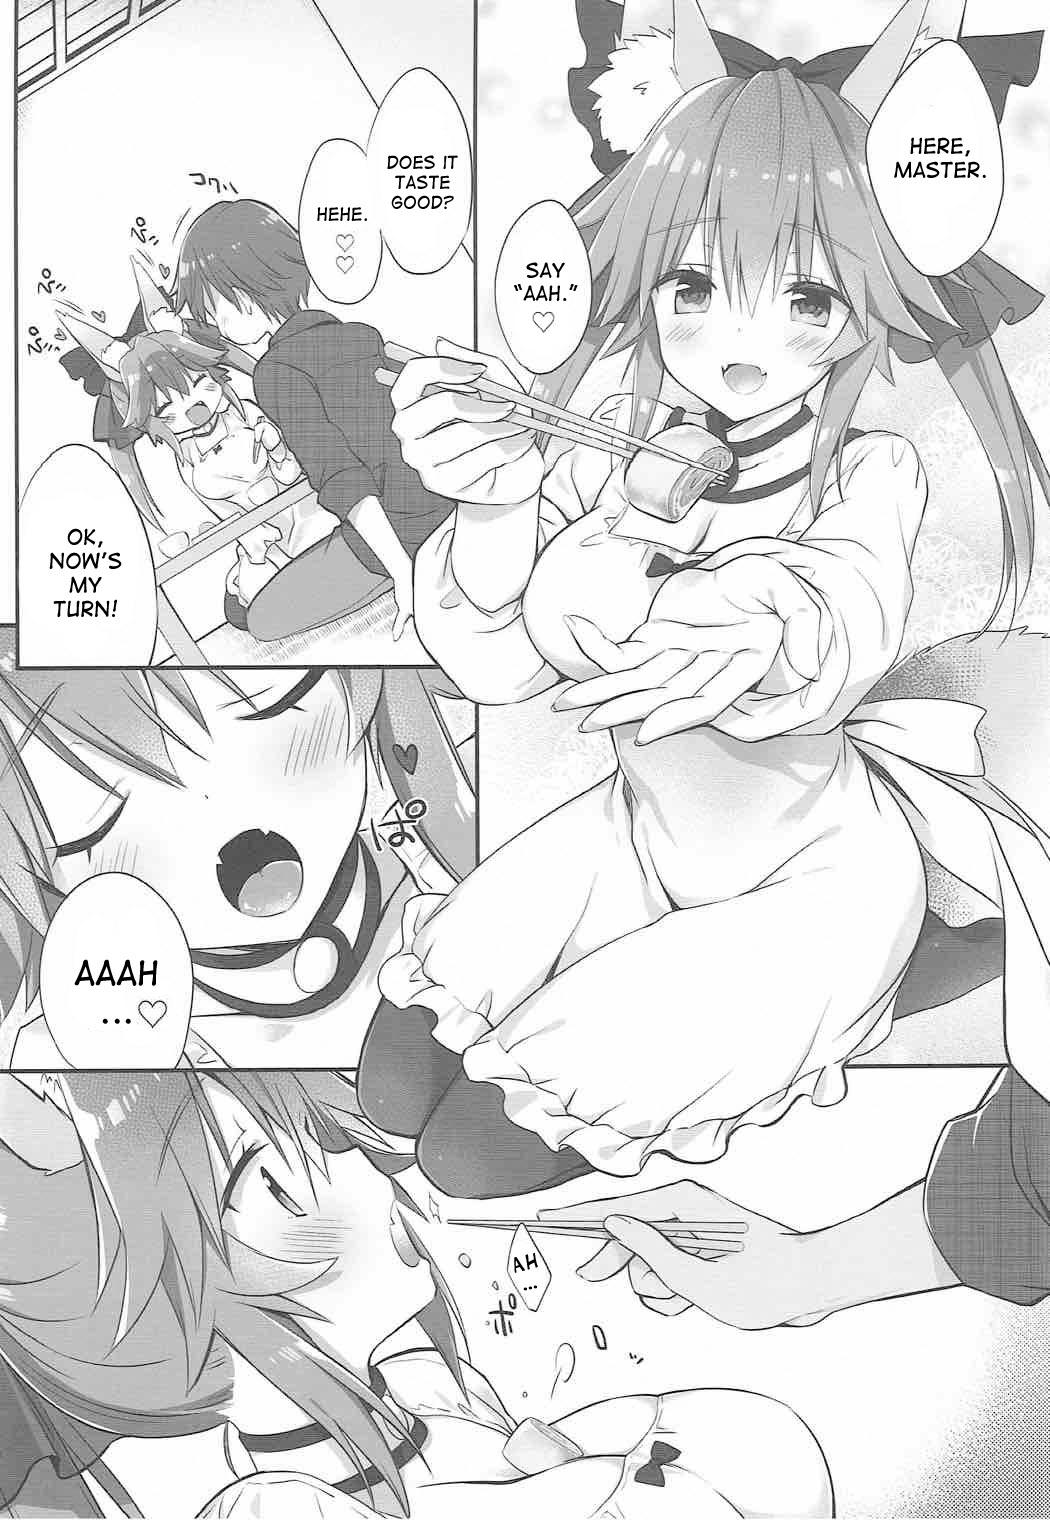 Girl Ore to Tamamo to Shiawase Yojouhan - Fate grand order Fate extra Freeporn - Page 5